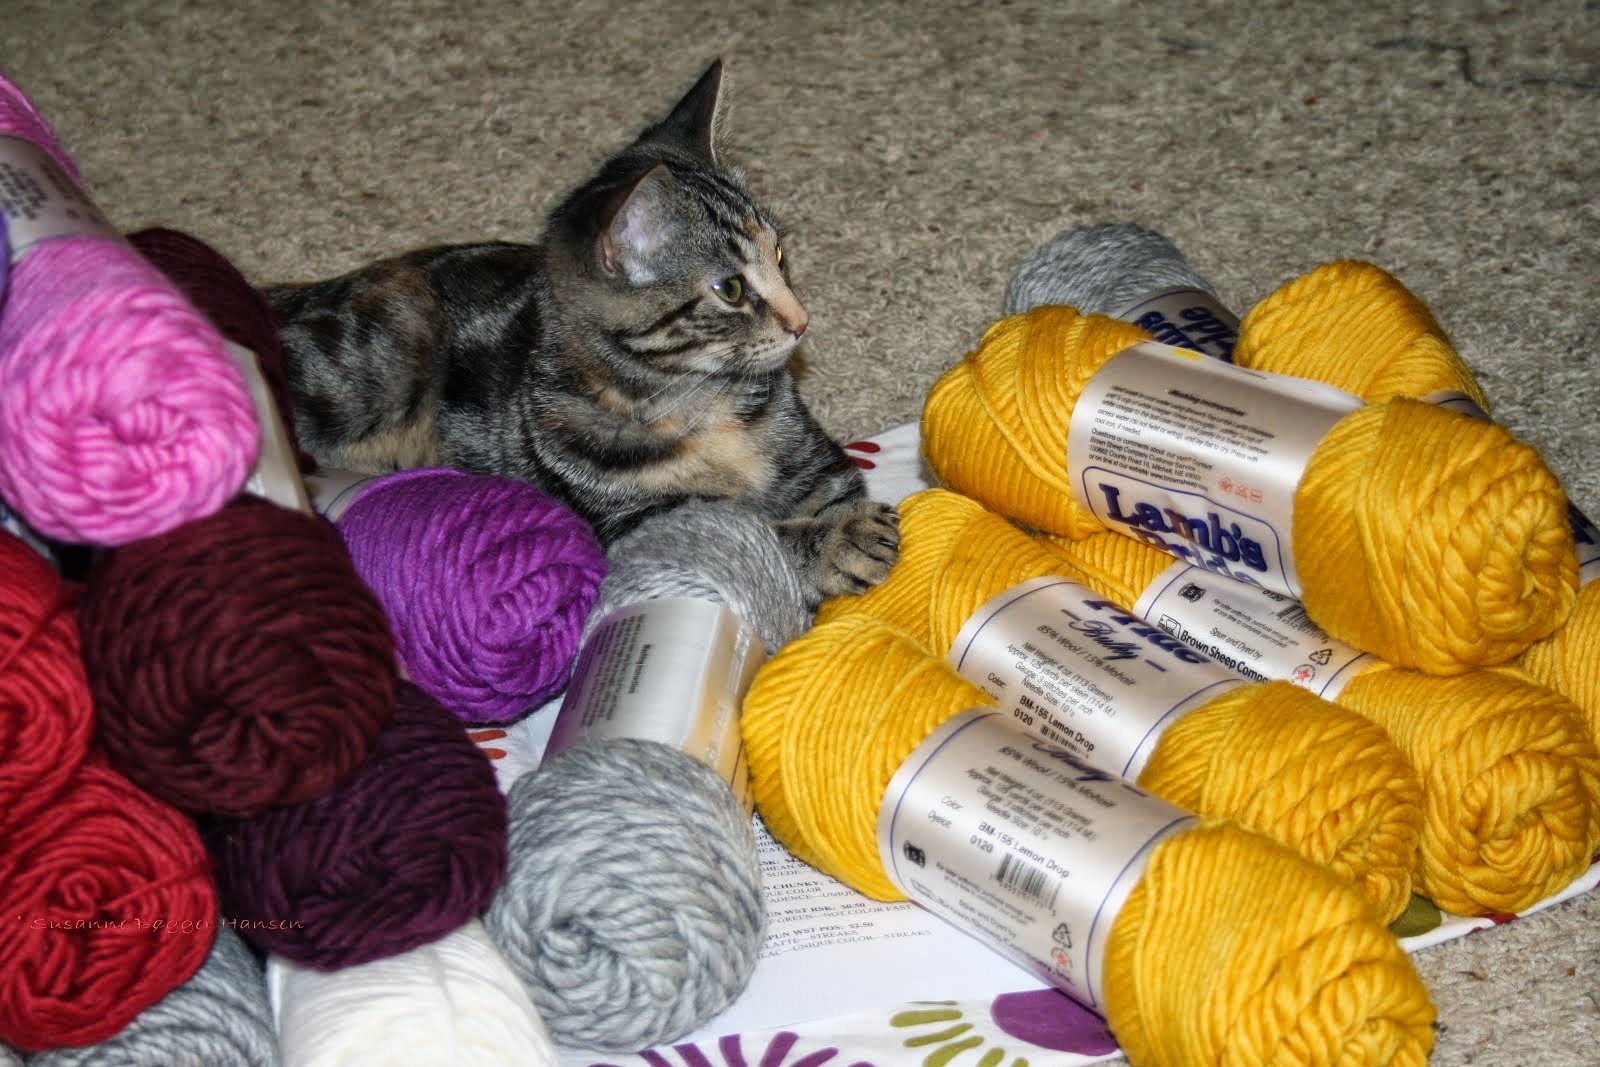 Another yarn lover